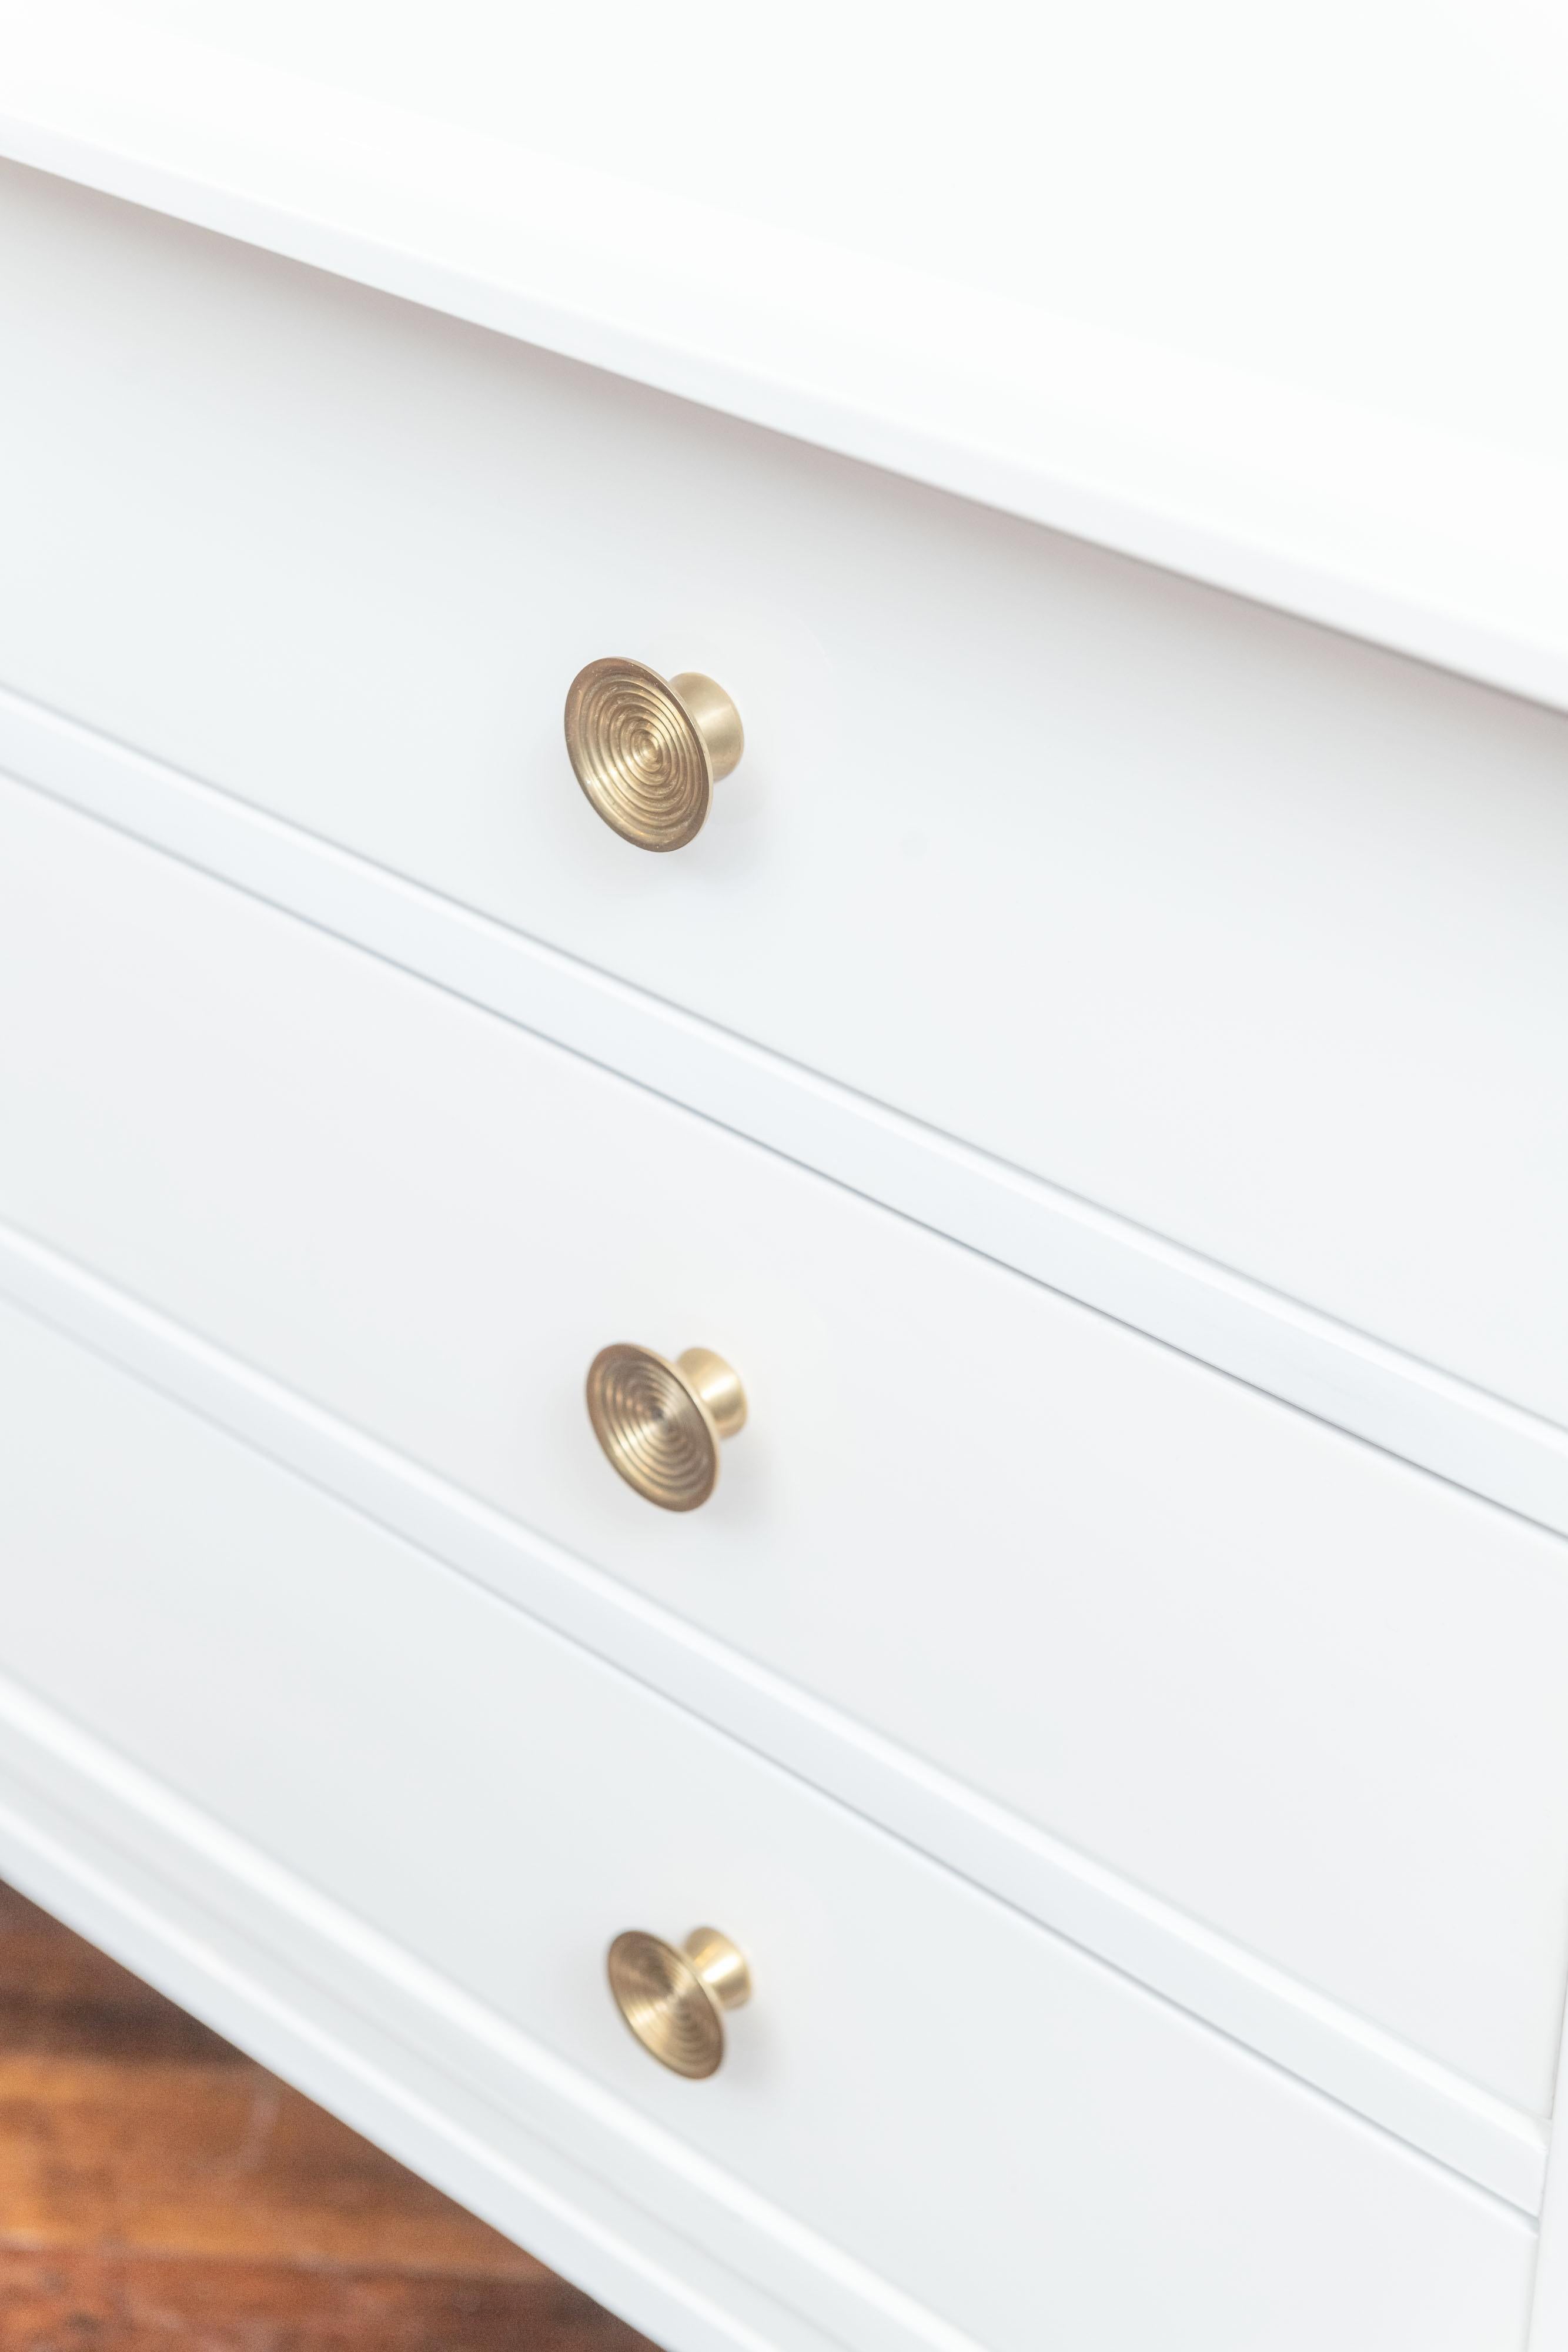 Brass Carlo de Carli Chest of Drawers for Sormani, Italy For Sale